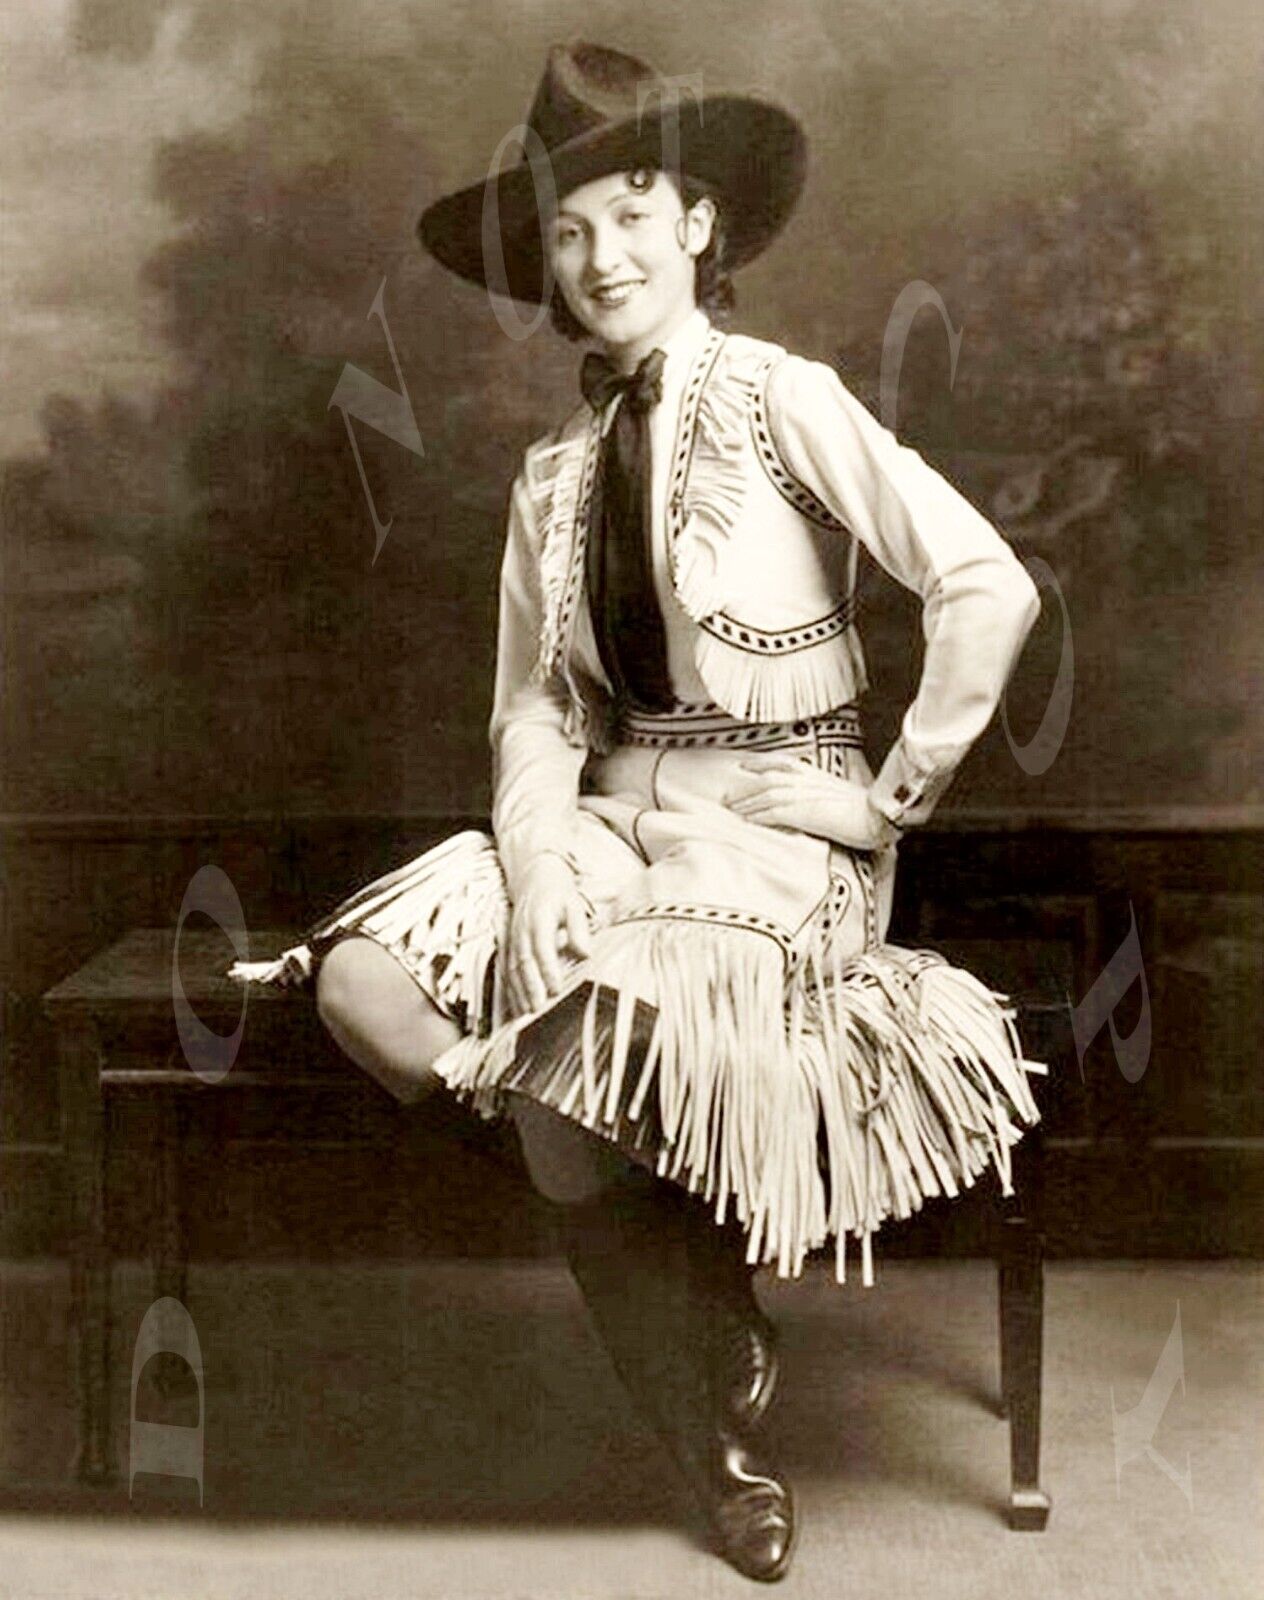 ANTIQUE WESTERN REPRODUCTION 8X10 PHOTOGRAPH PRETTY COWGIRL MARY DUNCAN c. 1928